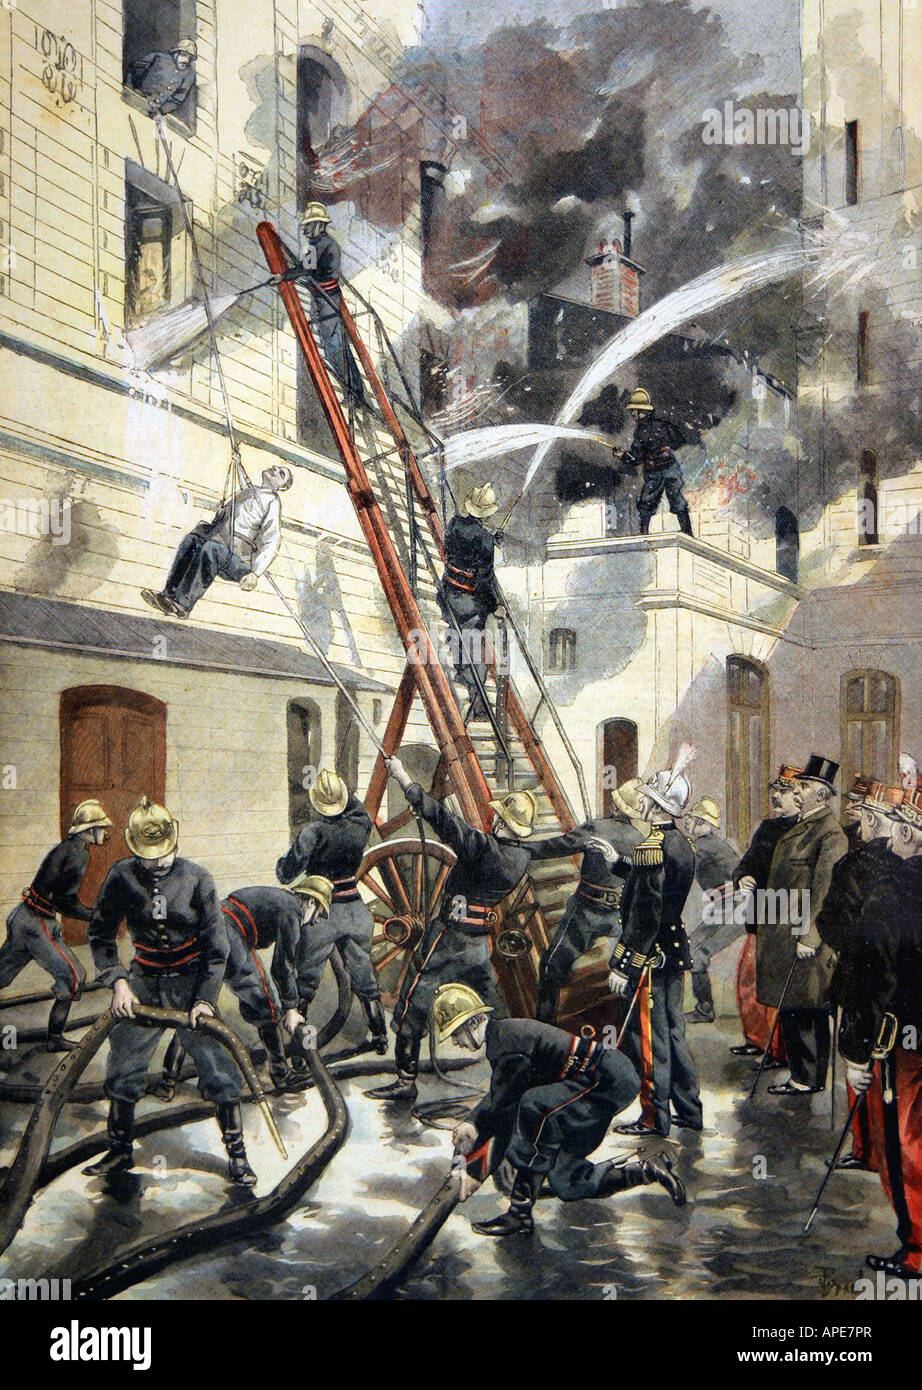 press/media, magazines, 'Le Petit Journal', Paris, 9. volume, number 379, illustrated supplement, Sunday 20 February 1898, illustration, 'The president of the Republic Felix Faure visiting a rescue exercise of the Parisian fire brigade', , Stock Photo